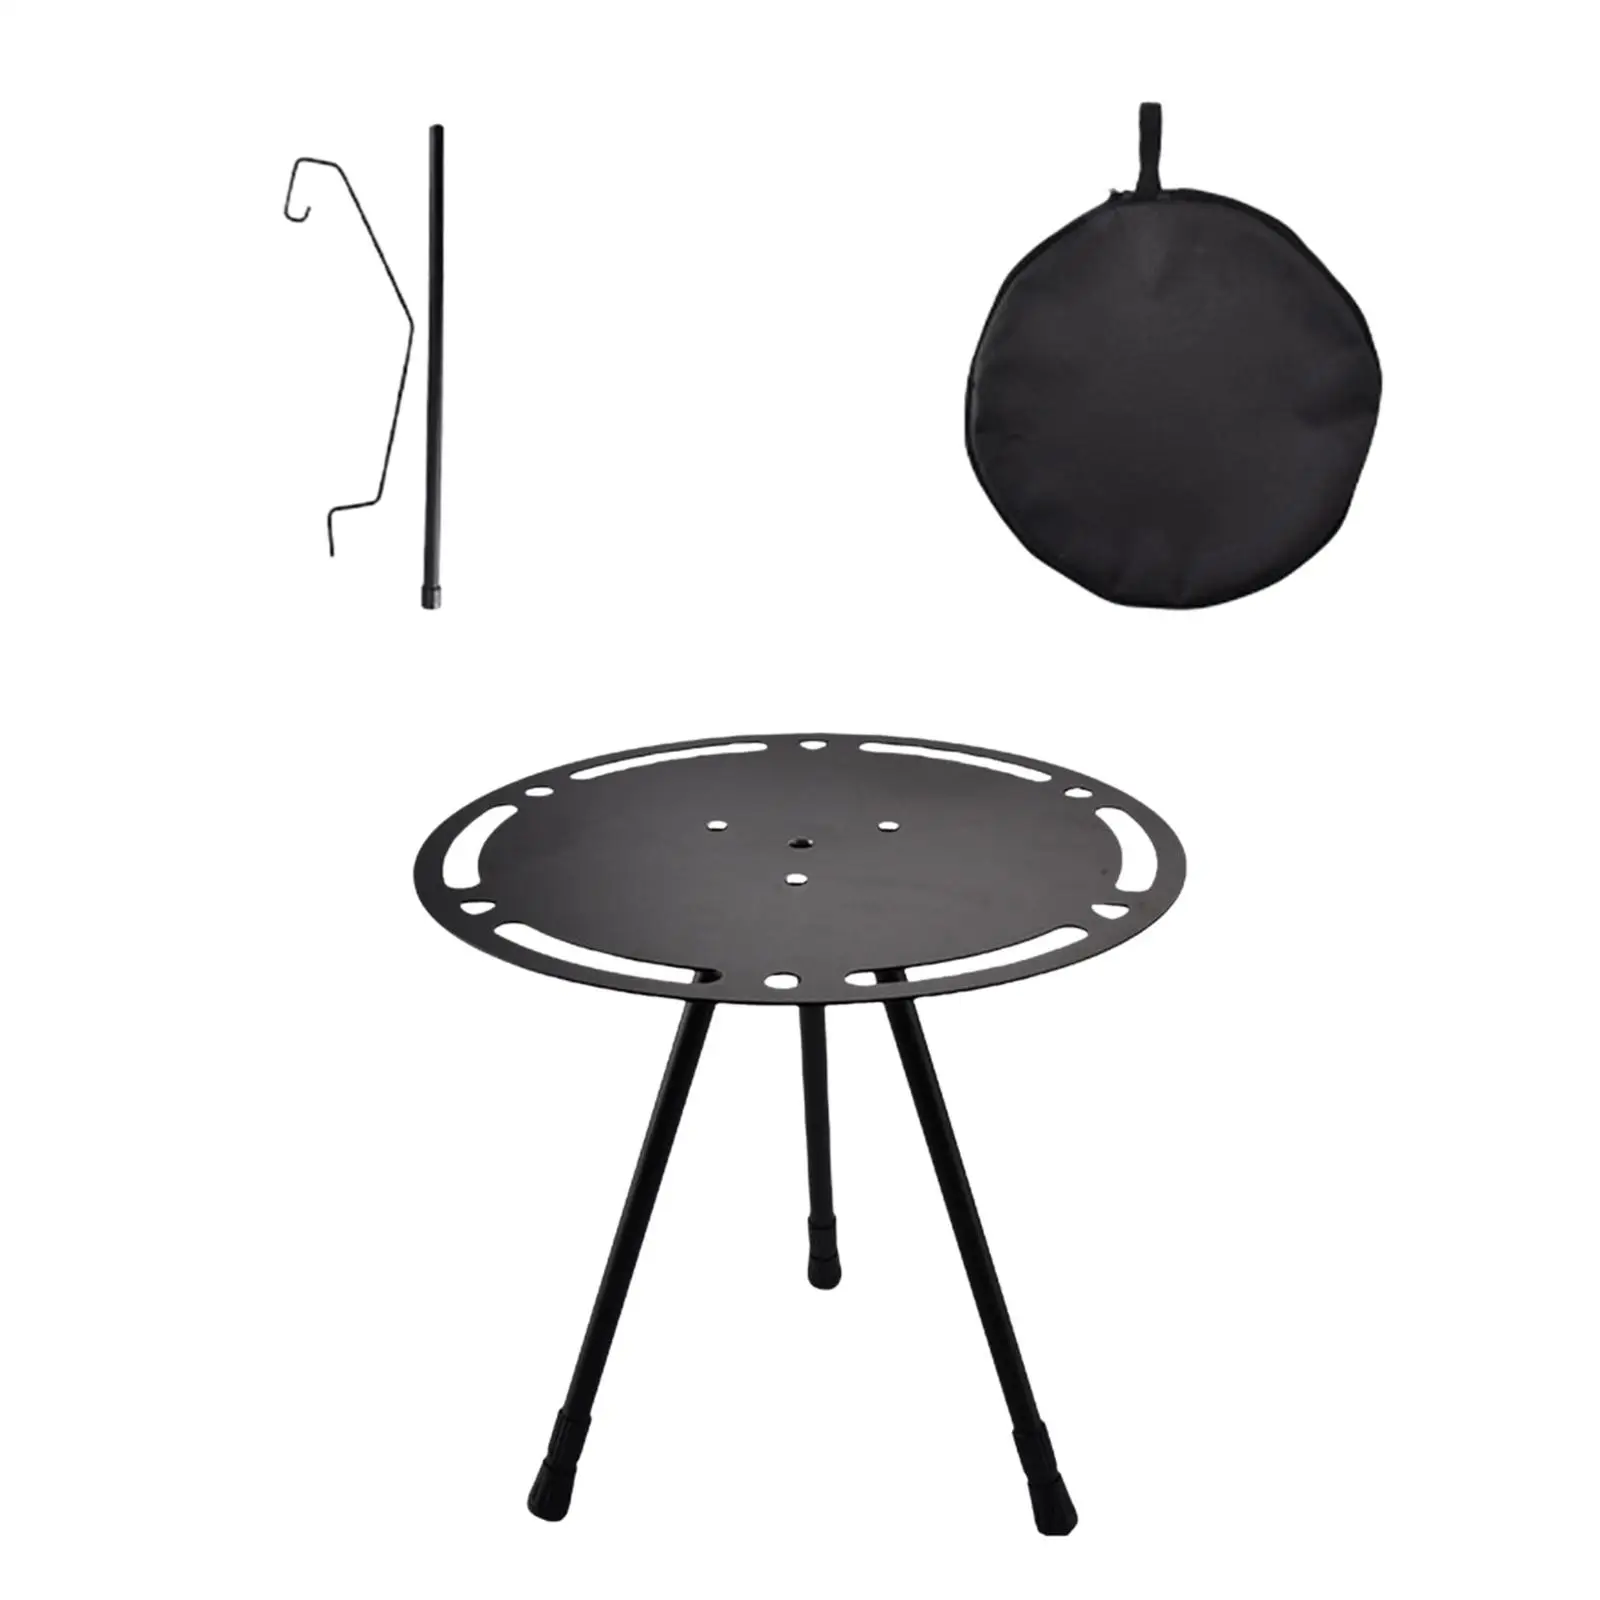 Camping Table Detachable Small Round Table Portable Table Folding Table Outside Tea Table for Picnic Camping Patio